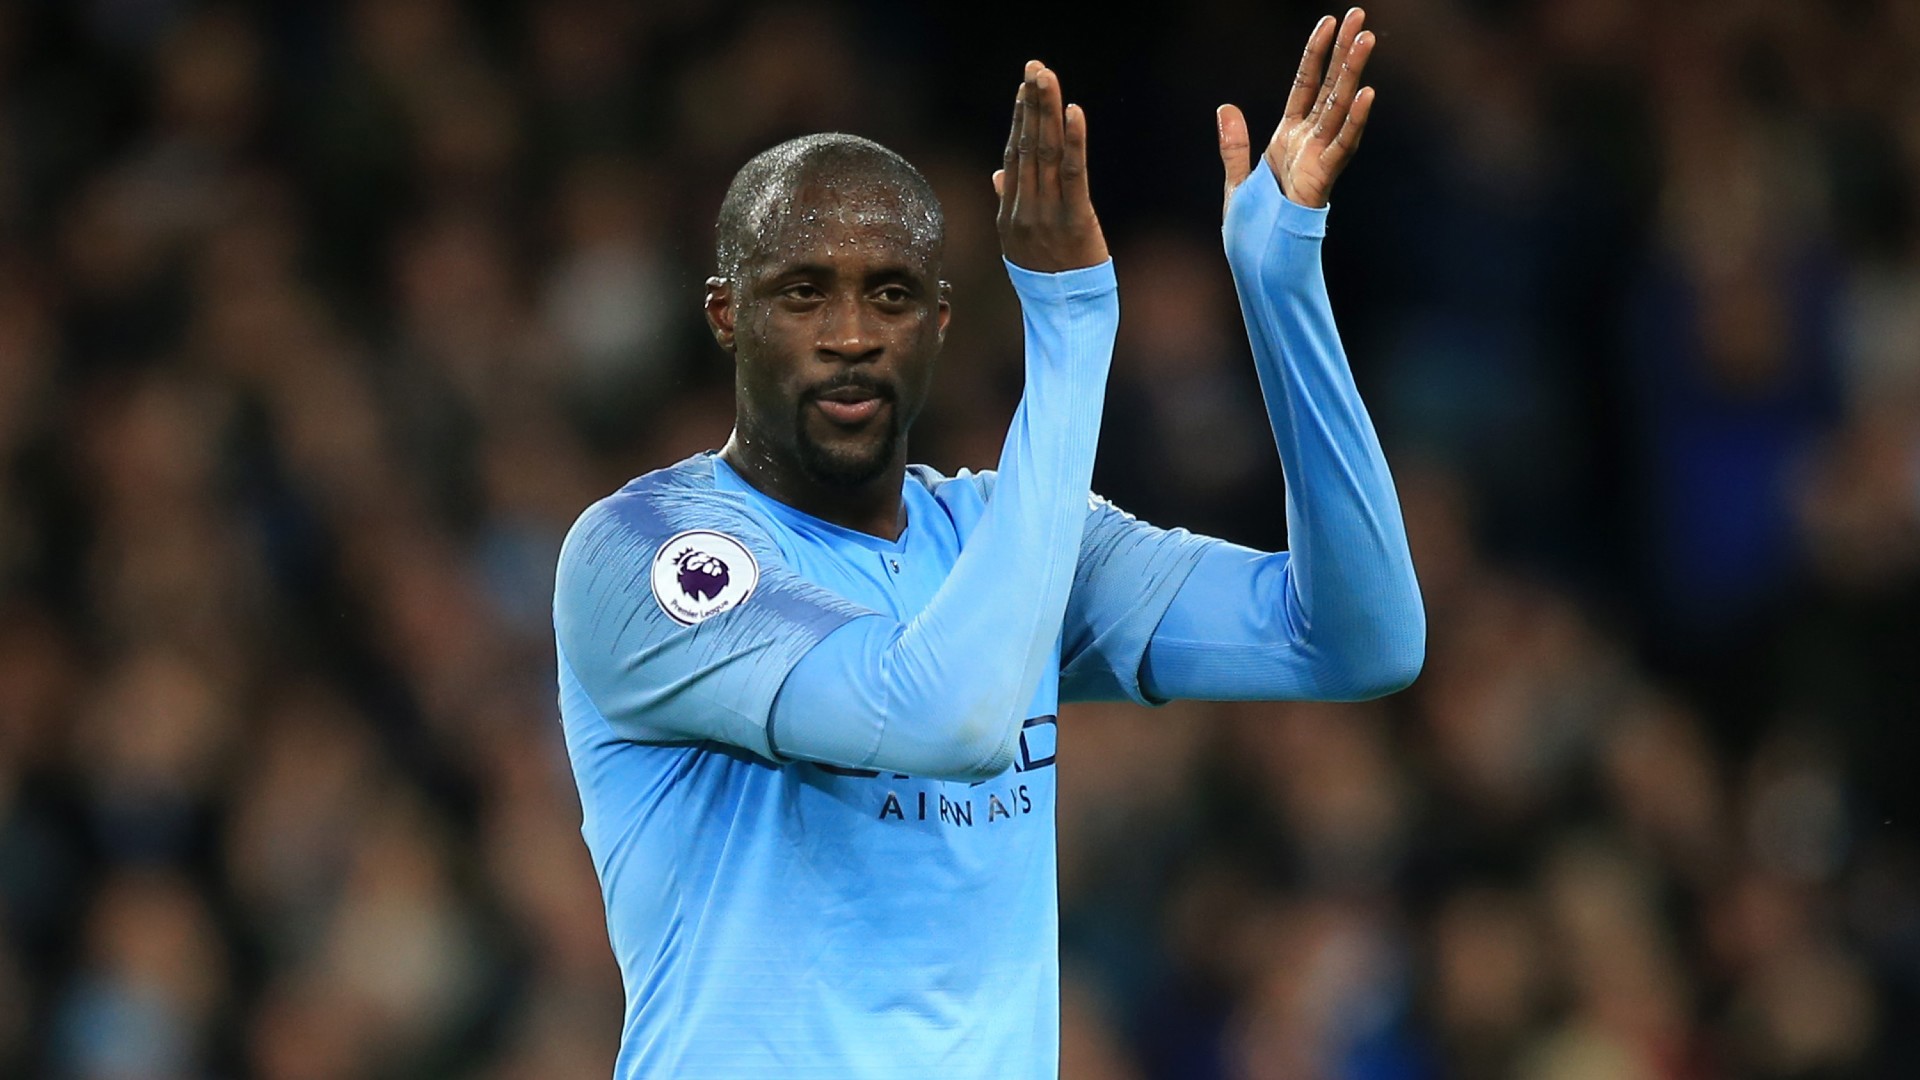 CHANCE ENCOUNTER : Meeting Yaya Toure was a special moment for Sarah Gait.